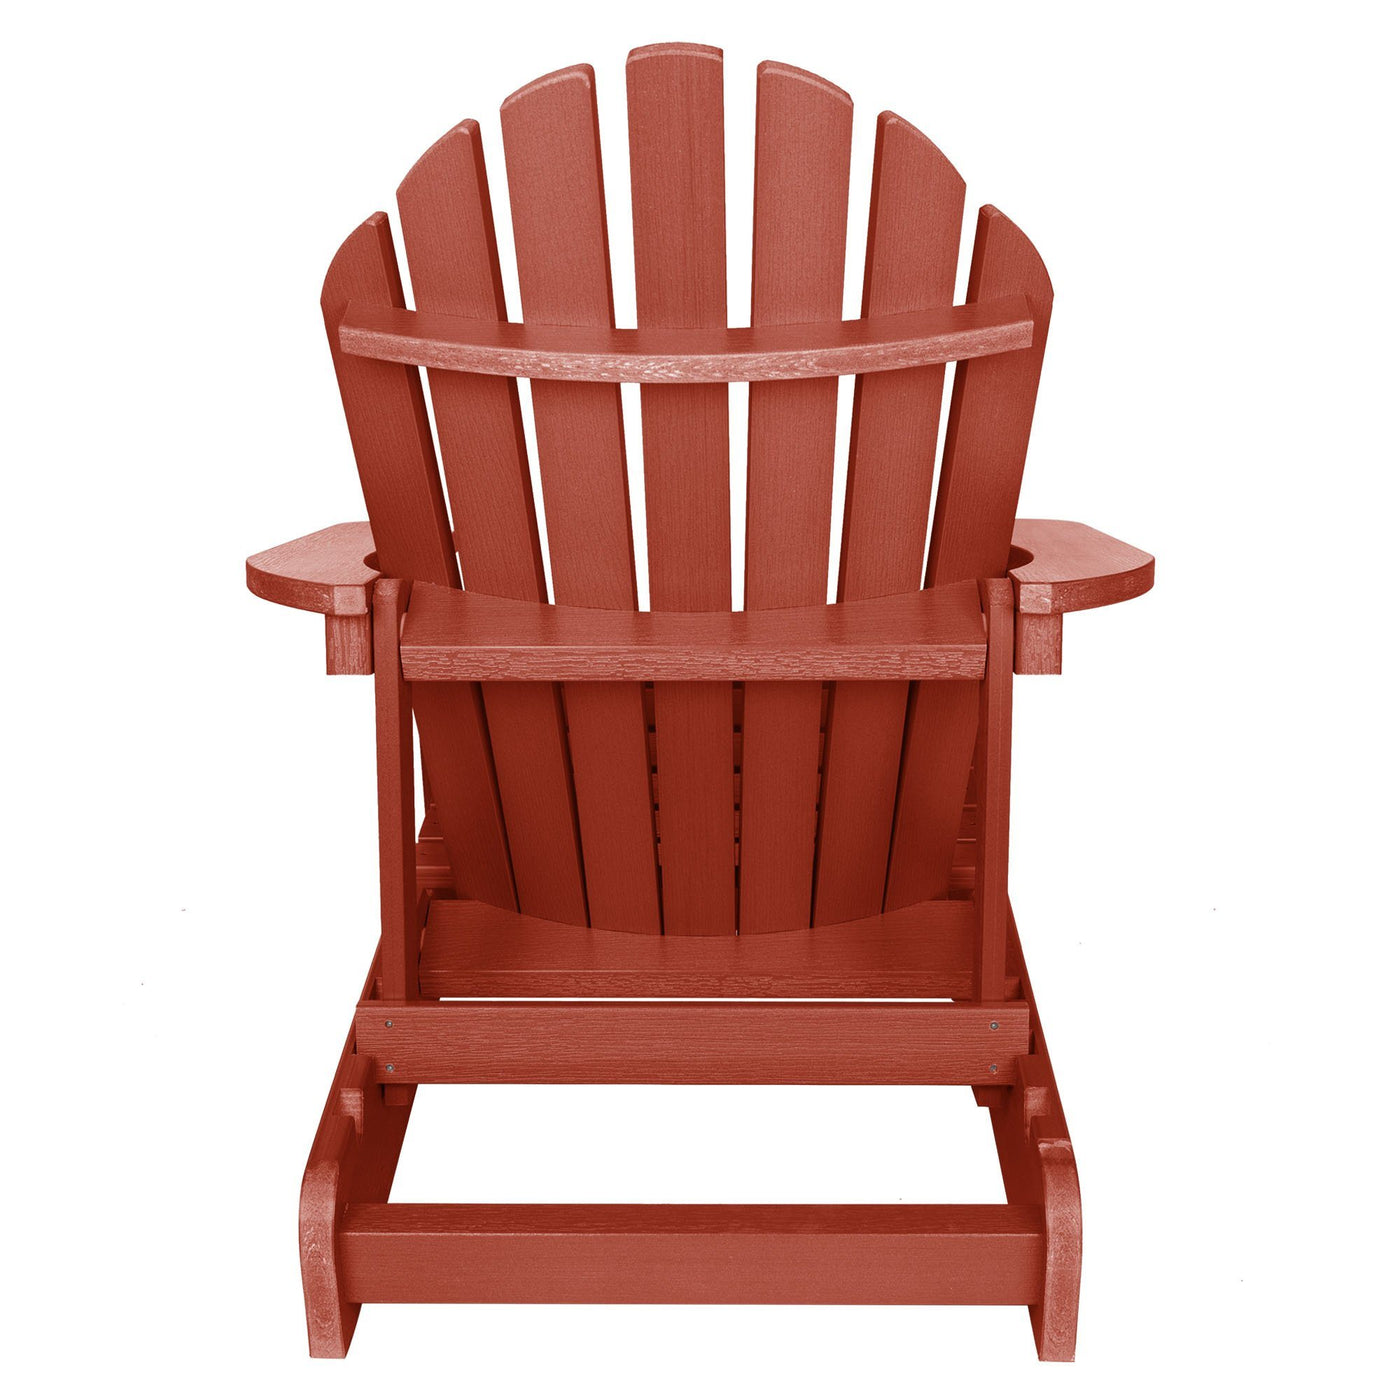 Back view of Hamilton Adirondack chair in Rustic red